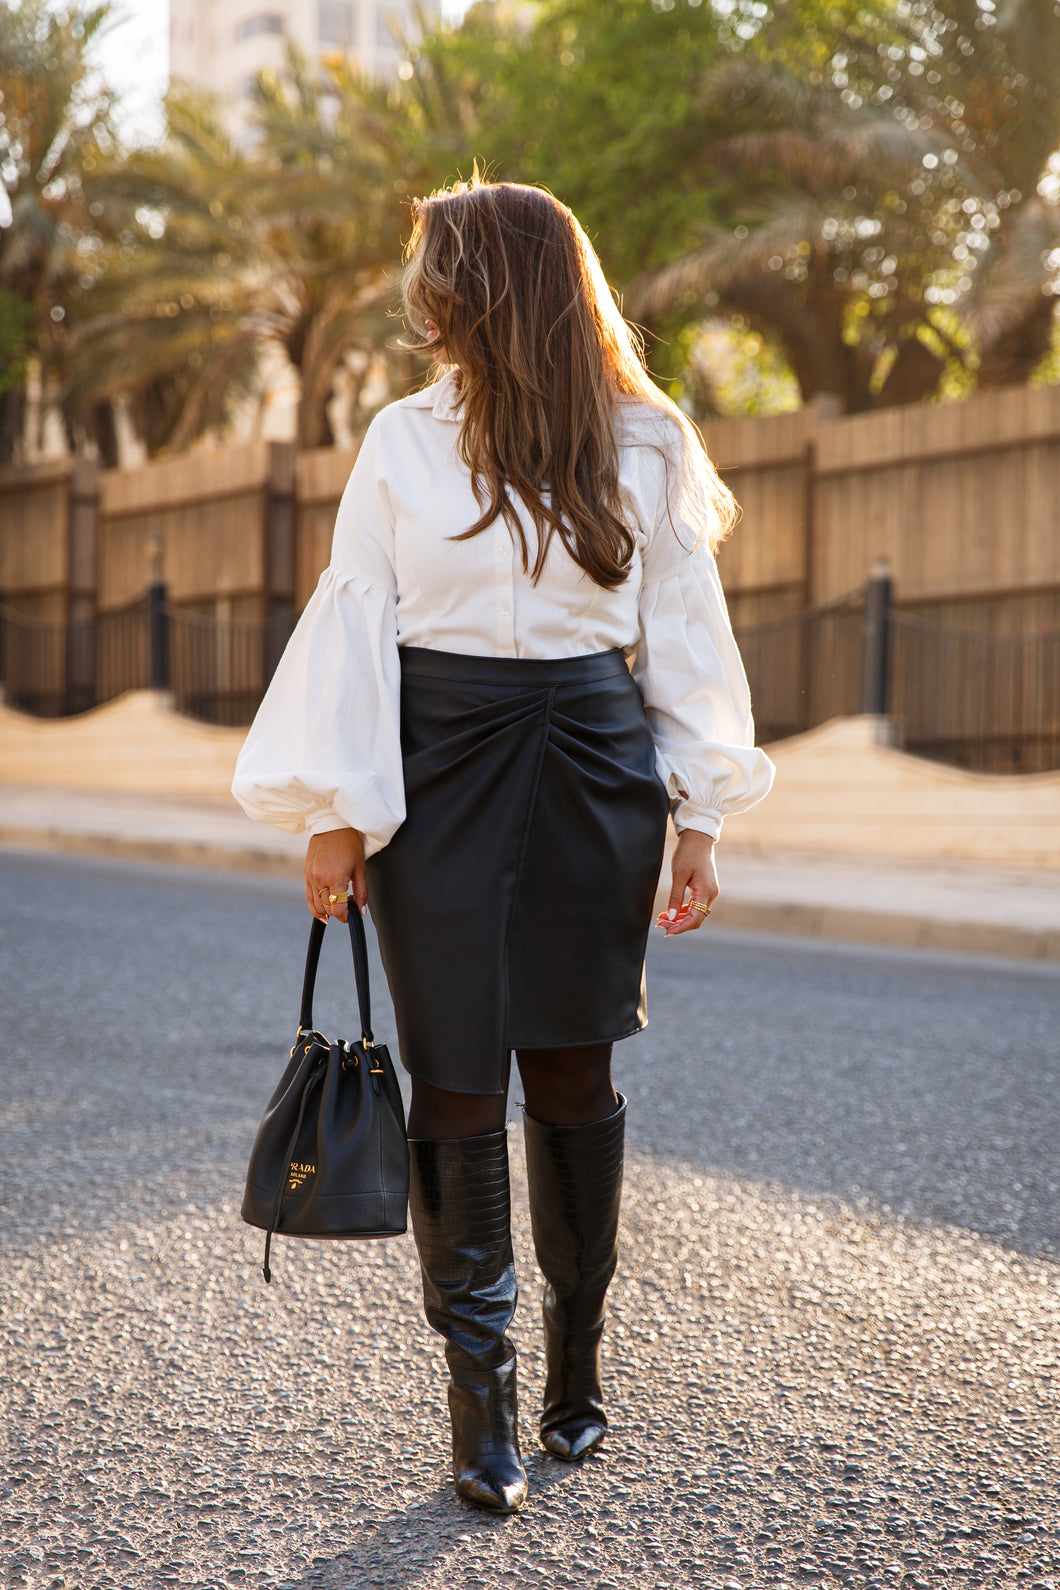 Full Look (Royal Puff Sleeve Top & Draped Leather Skirt)